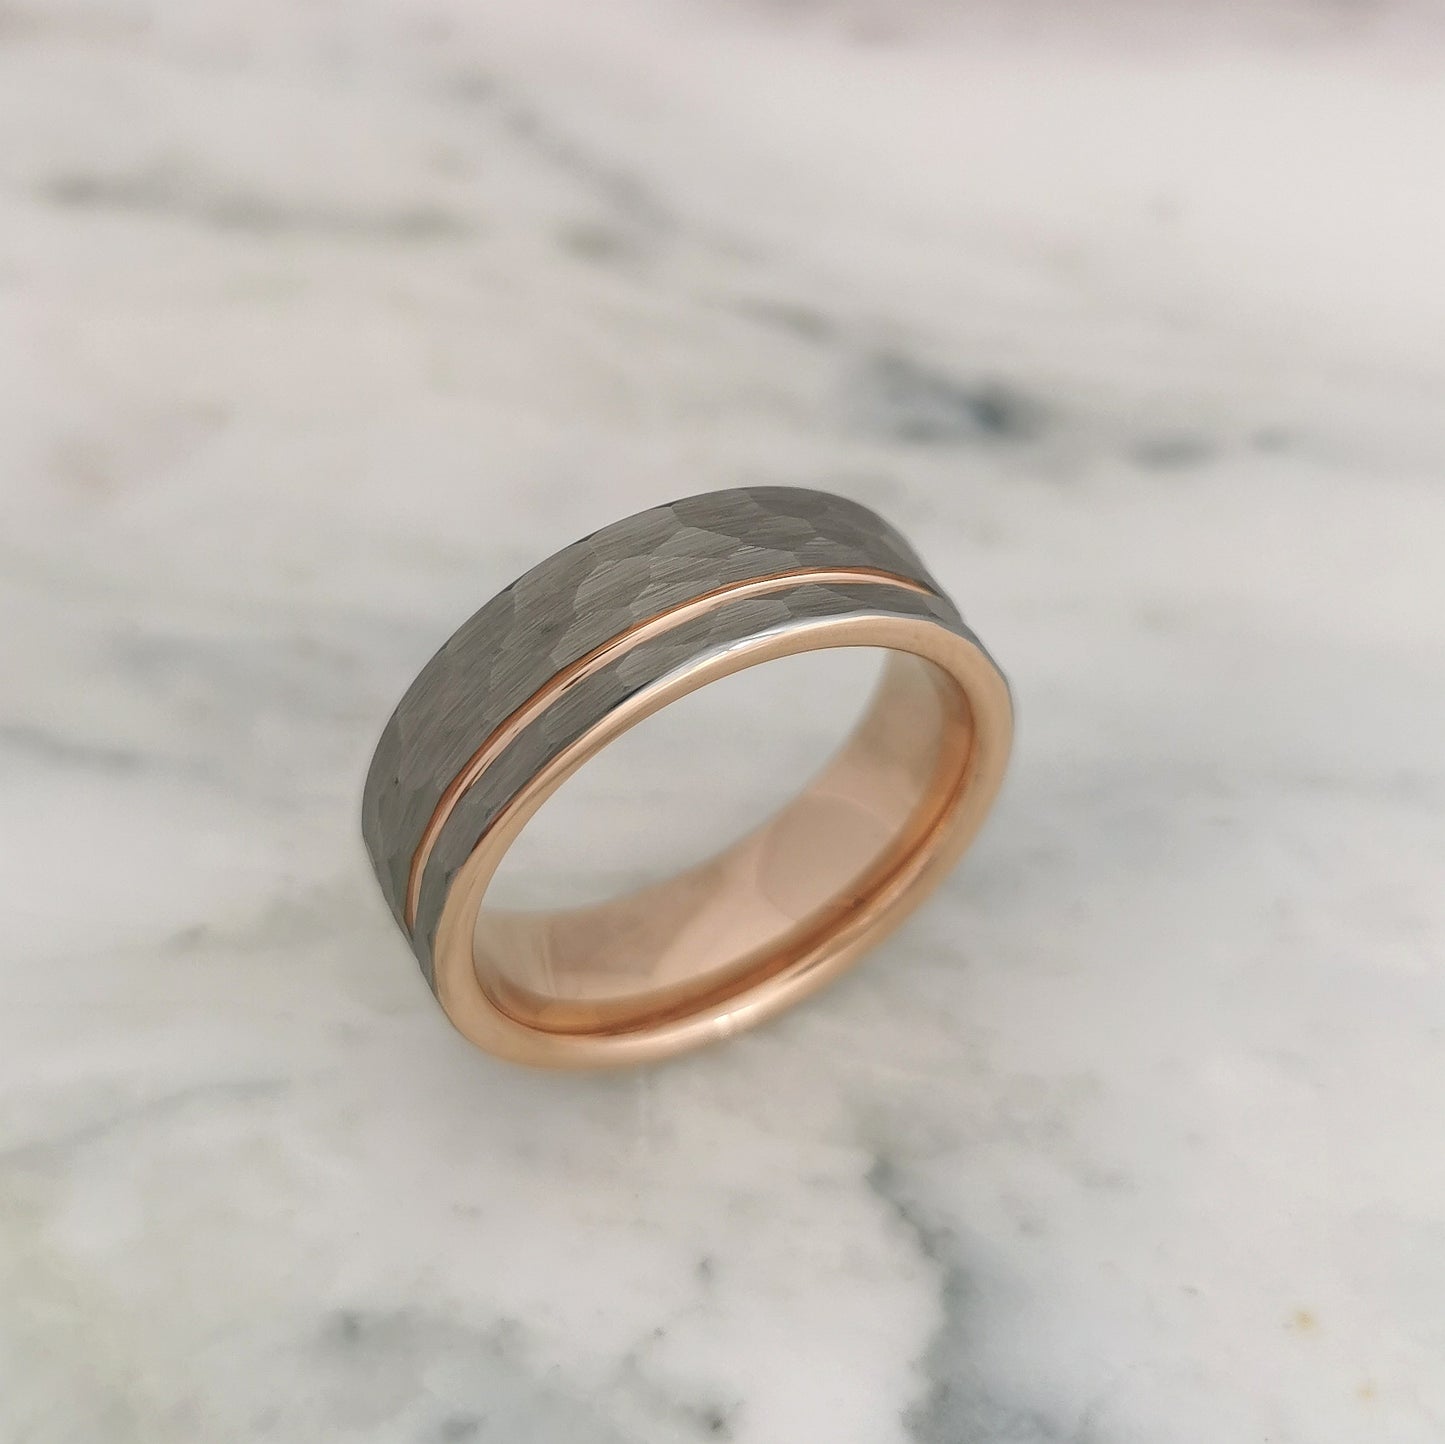 8mm Textured Tungsten Ring with Rose Gold Plating